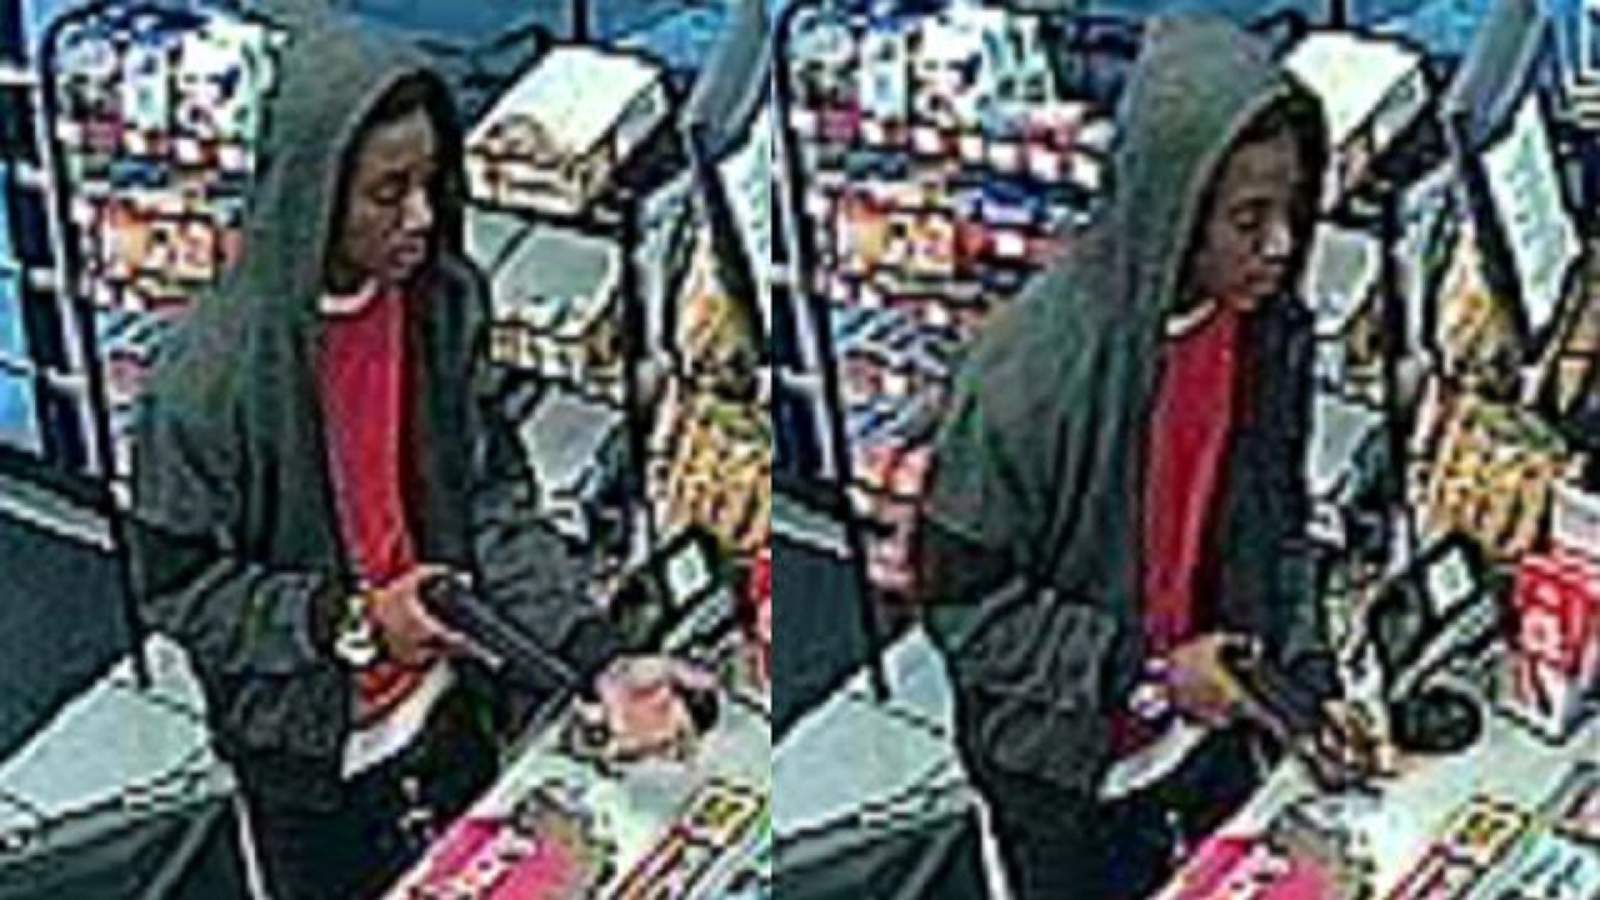 Man wielding handgun steals cash from South Side Circle K, police say